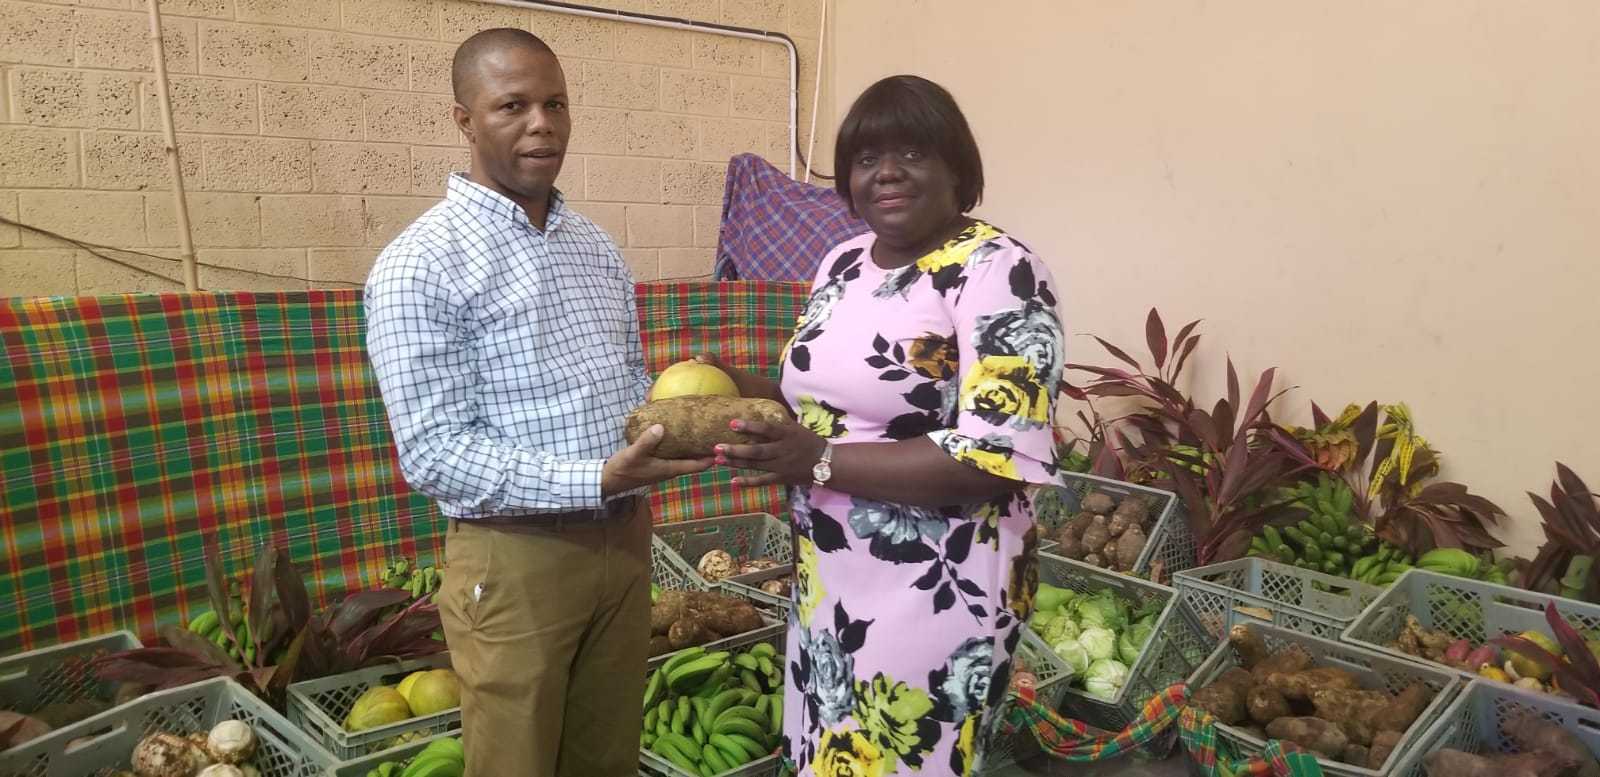 Ministry of Agriculture makes charitable donations